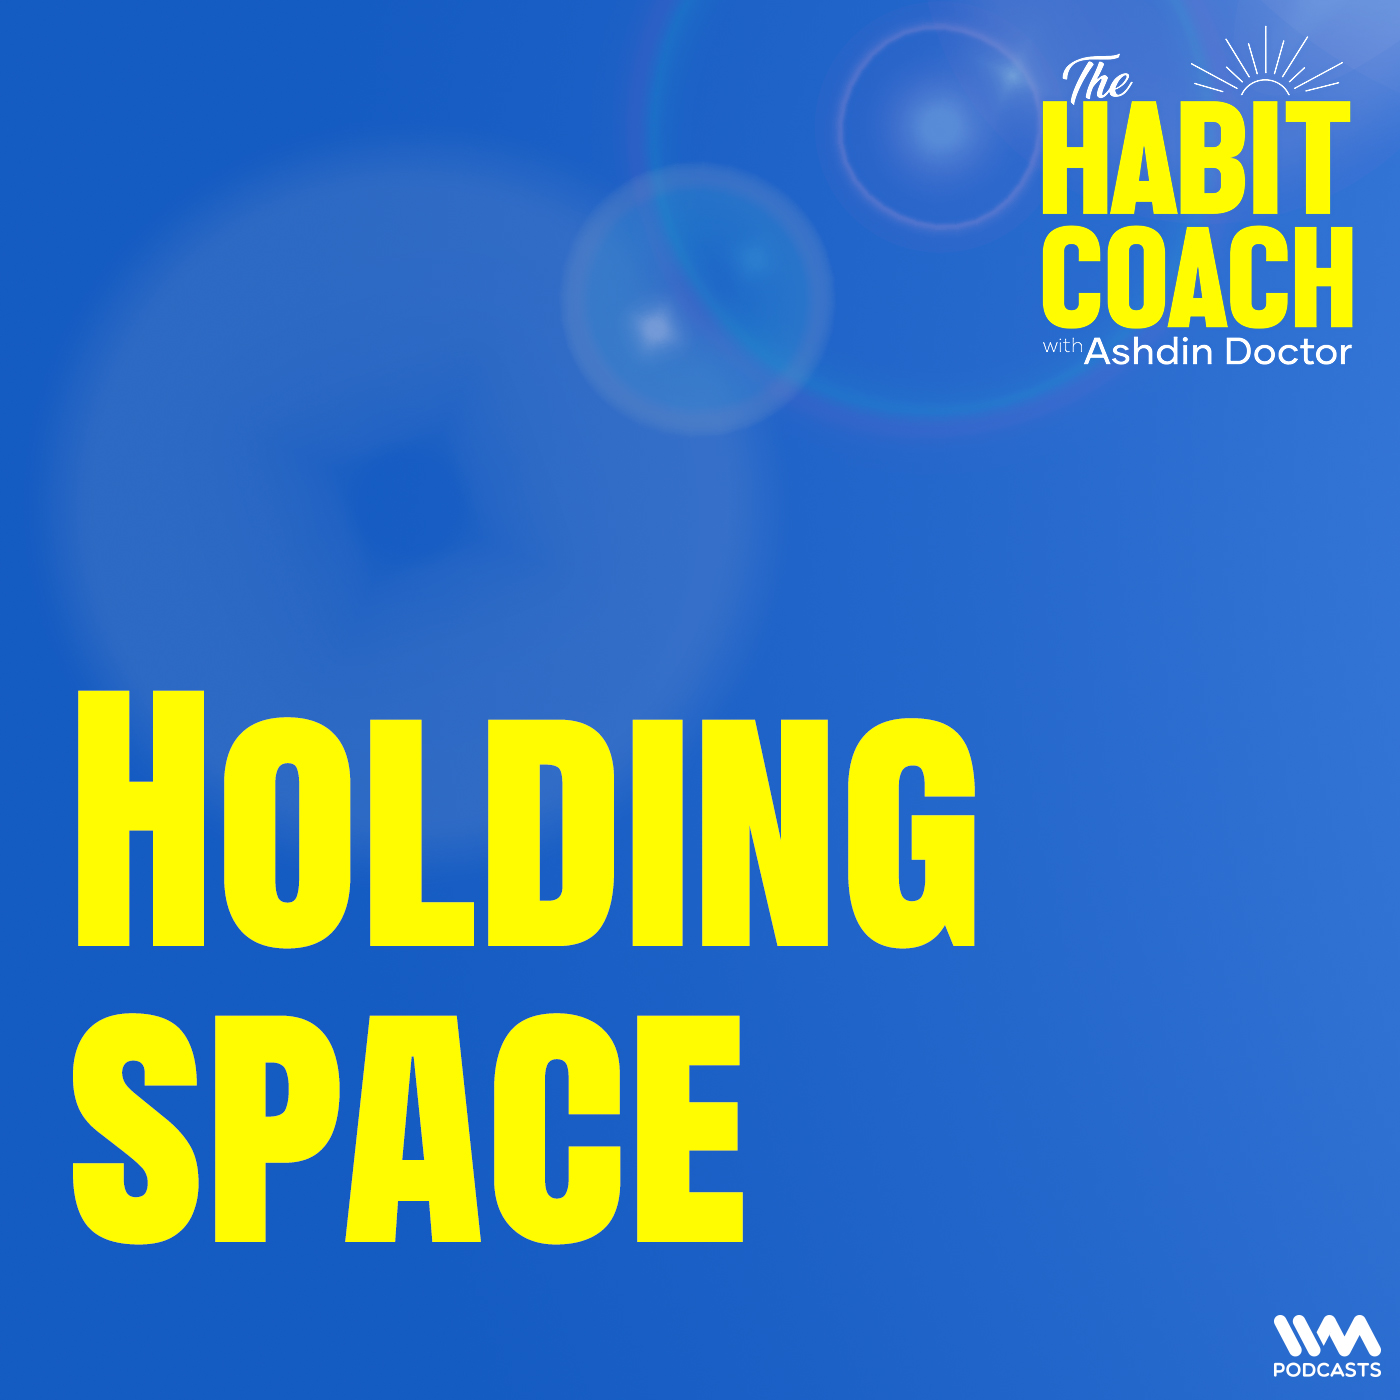 Holding space